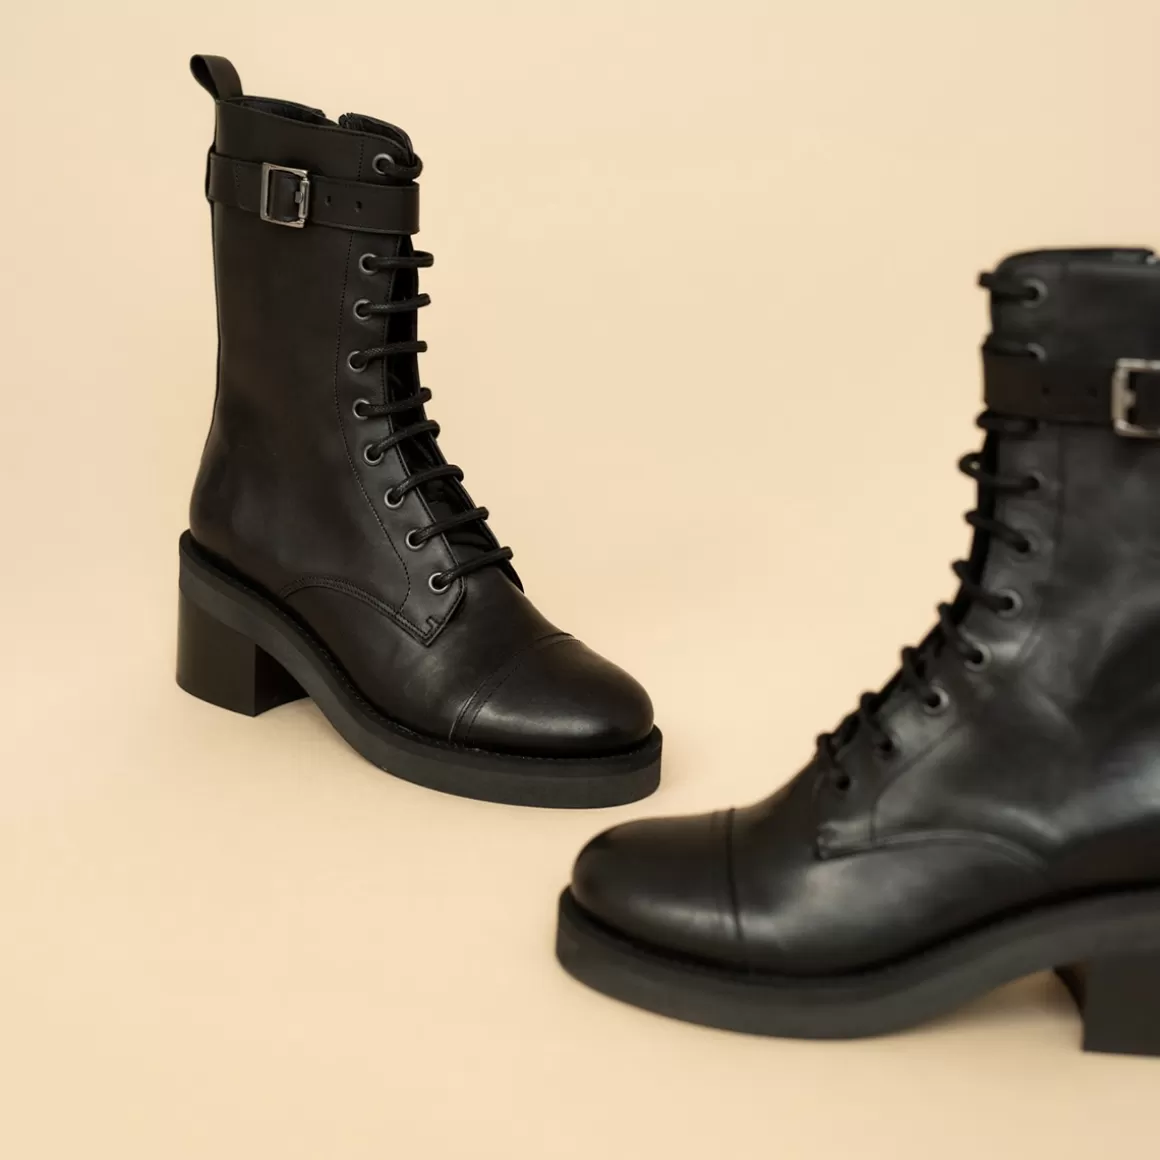 Lace-up boots, heels and silver detail<Jonak Fashion